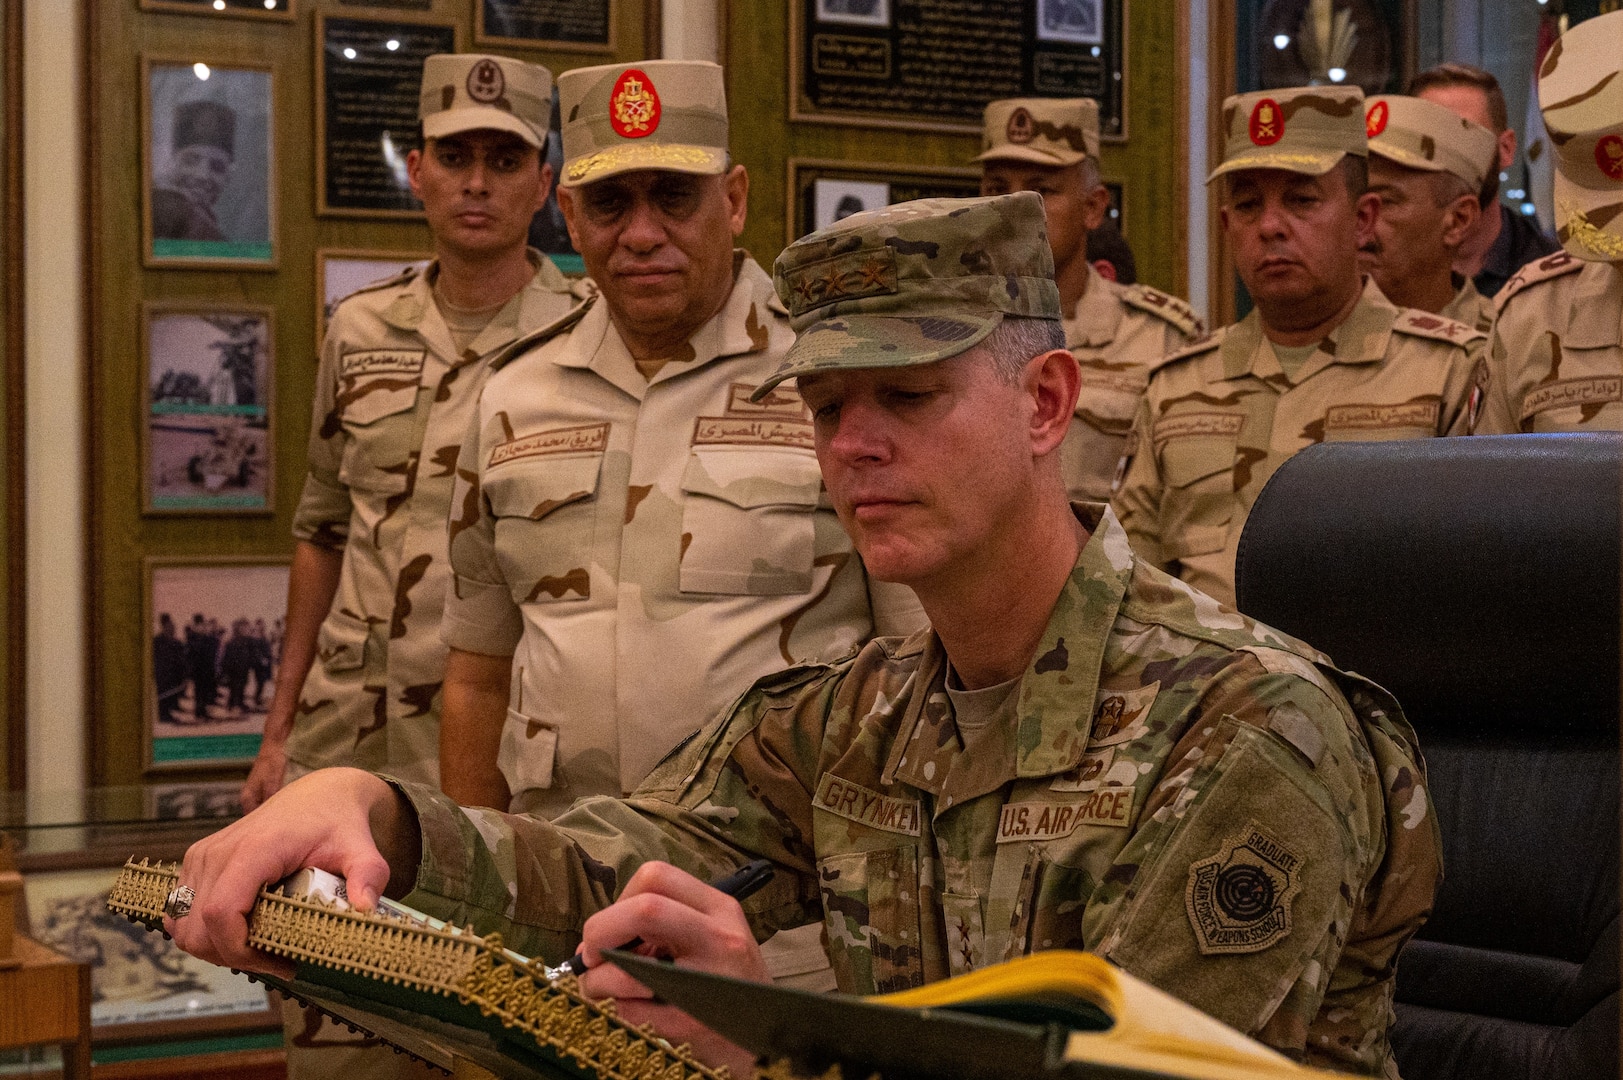 U.S. Air Force Lt. Gen. Alexus G. Grynkewich, Ninth Air Force (Air Forces Central) commander, signs a distinguished visitor’s log at the Egyptian Air Defense Force museum in Cairo, Egypt, Aug. 30, 2022. During his visit, Grynkewich met with Egyptian military leaders to better integrate military operations, strengthen resolute partnerships and ensure security within the U.S. Central Command area of responsibility. (U.S. Air Force photo by Senior Airman Dominic Tyler)